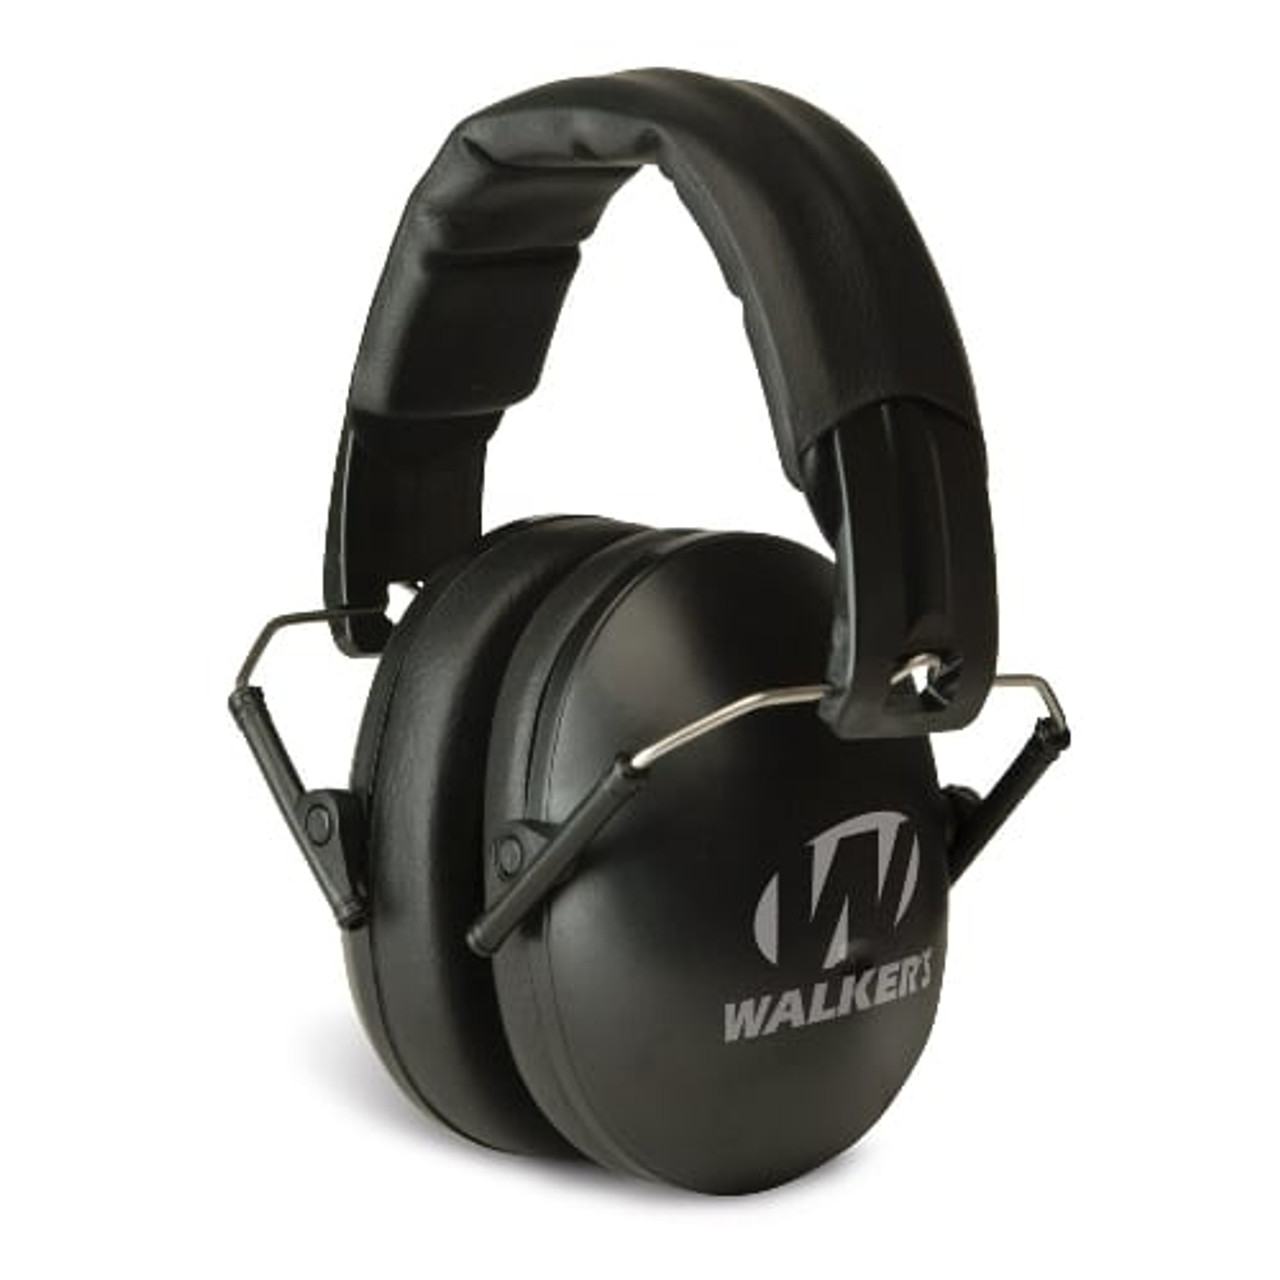 WALKER'S YOUTH & WOMEN'S 
Passive Folding Muffs
Low Profile, Ultra Slim Cups
Ideal for women and youth 
ANSI 53.19 Rated
NRR 23 decibels noise reduction rating
Up to 33db when paired with included ear plugs
The range of noise reduction ratings for existing hearing protectors is approximately 0 to 30 
Higher numbers denote greater effectiveness